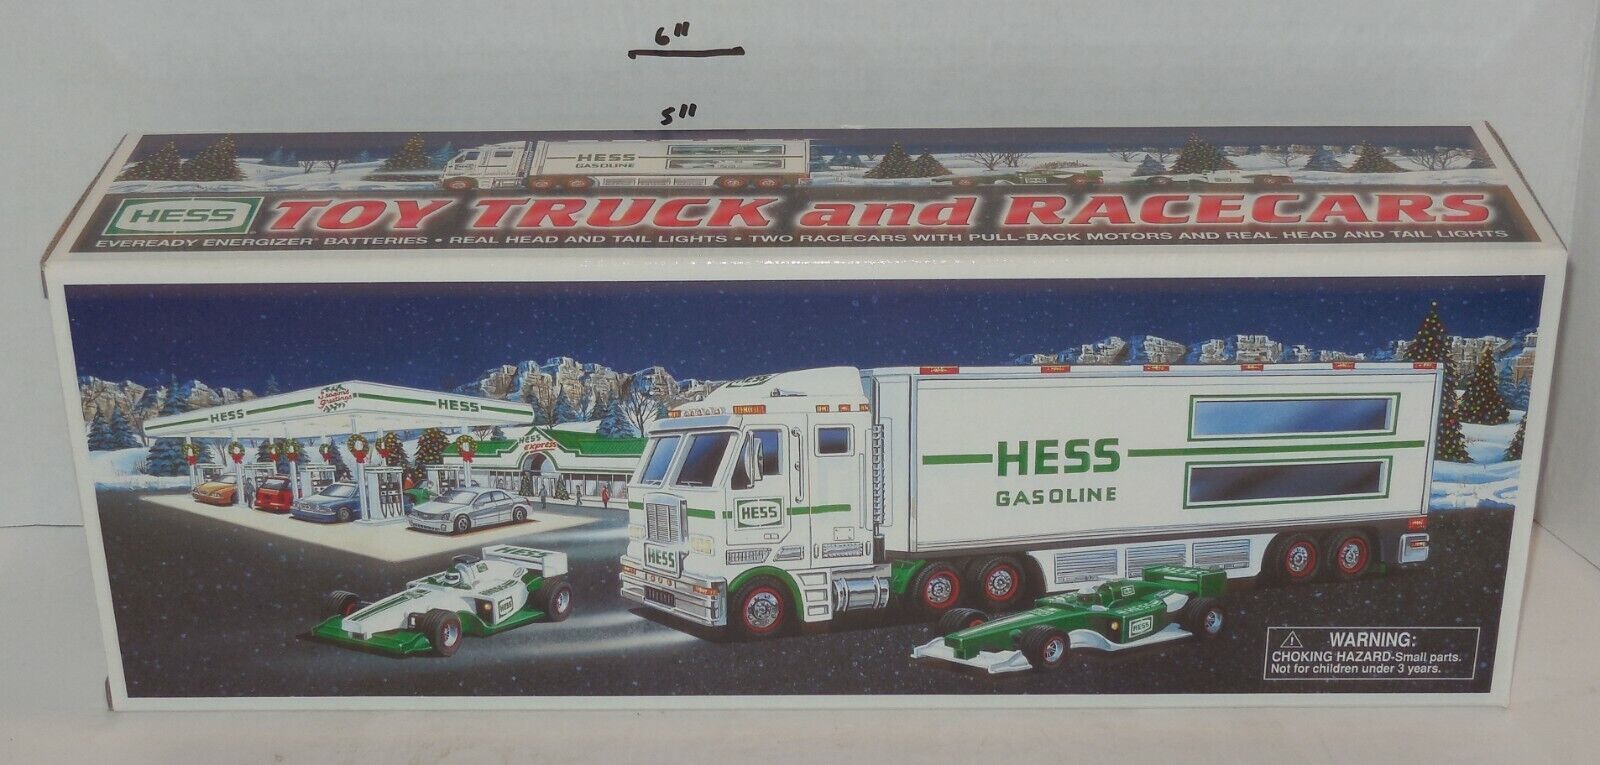 Primary image for 2003 Hess TOY TRUCK AND RACERCARS NIB New In BOX